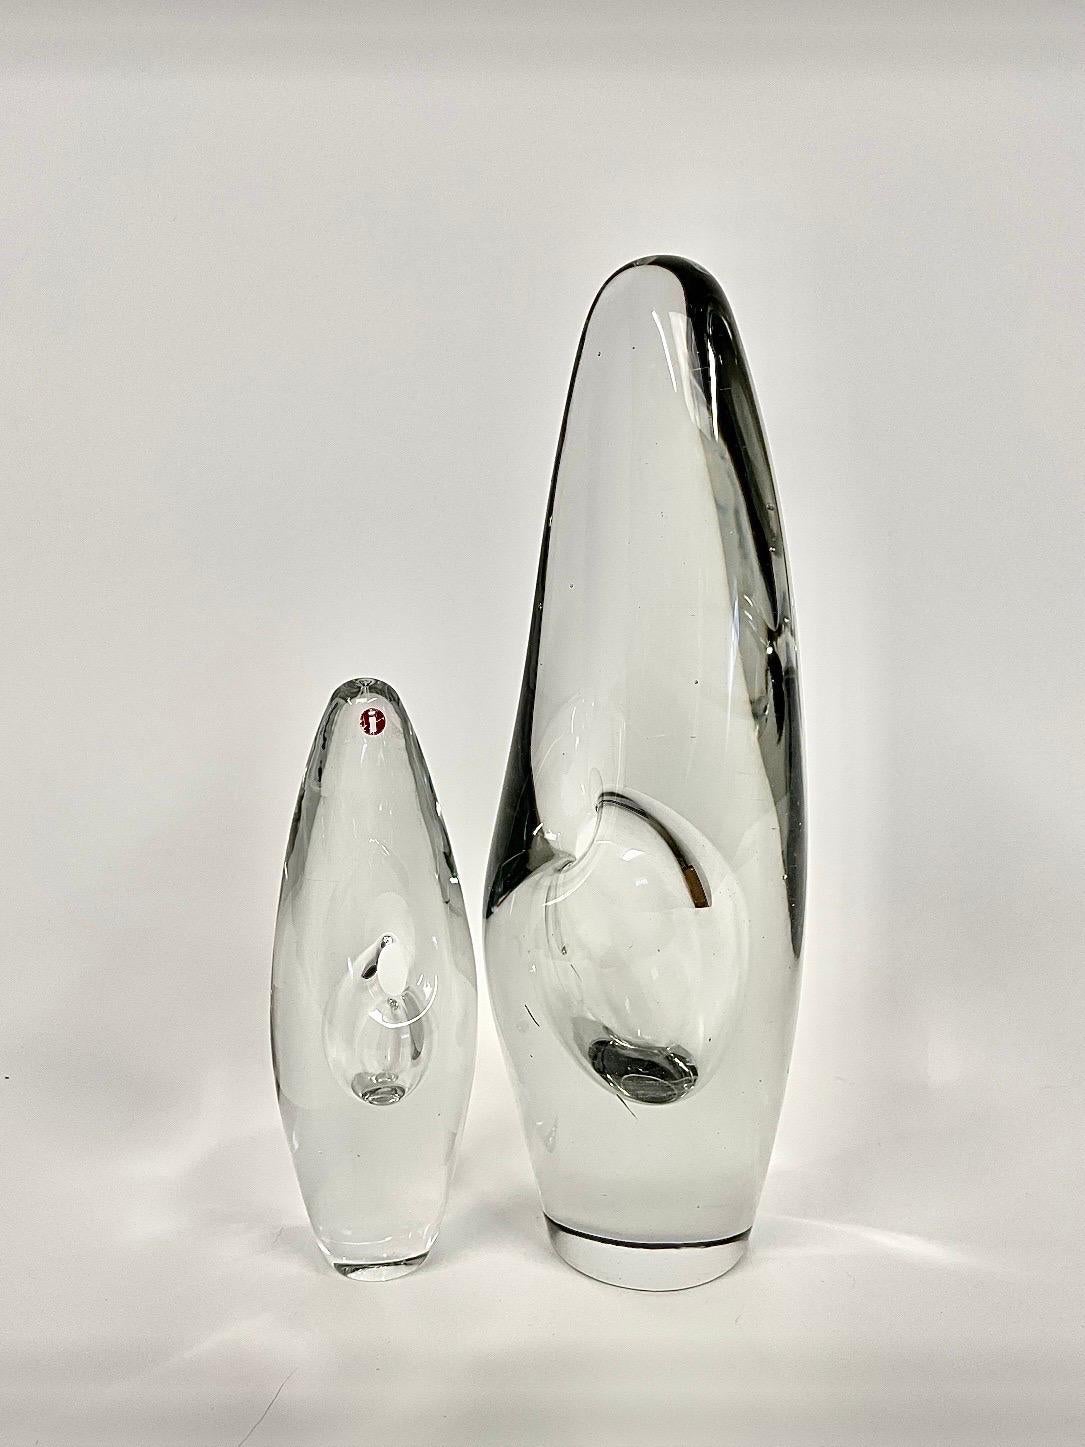 Scandinavian Modern A Pair of Finnish 1950s Vases Model Orchidéa by Timo Sarpaneva for Ittala For Sale